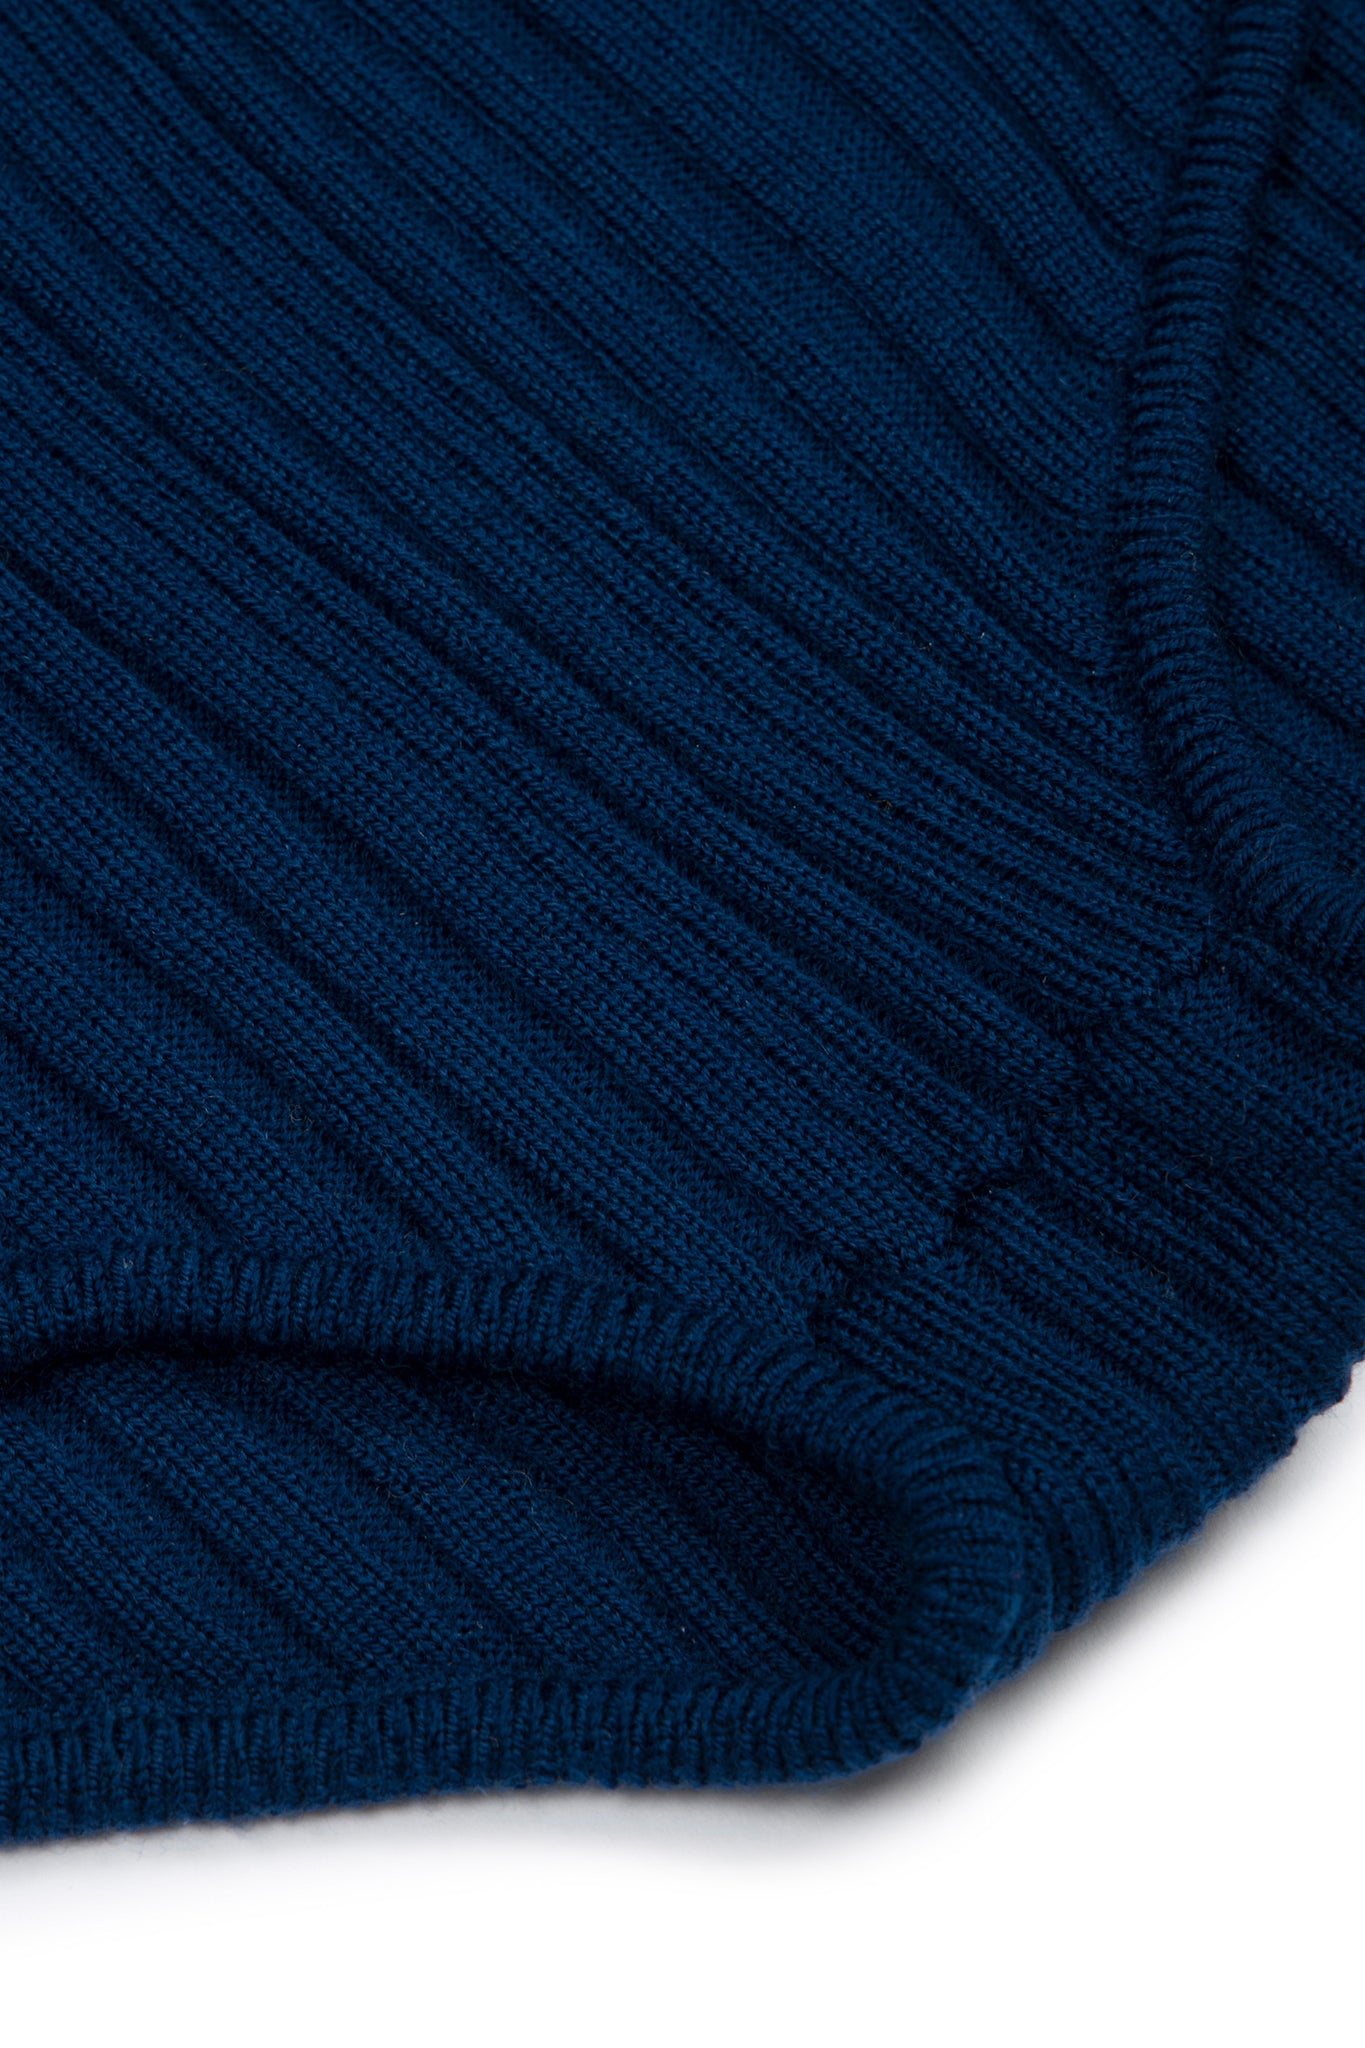 KNITTED PANT - ONLINE EXCLUSIVE - King & Tuckfield